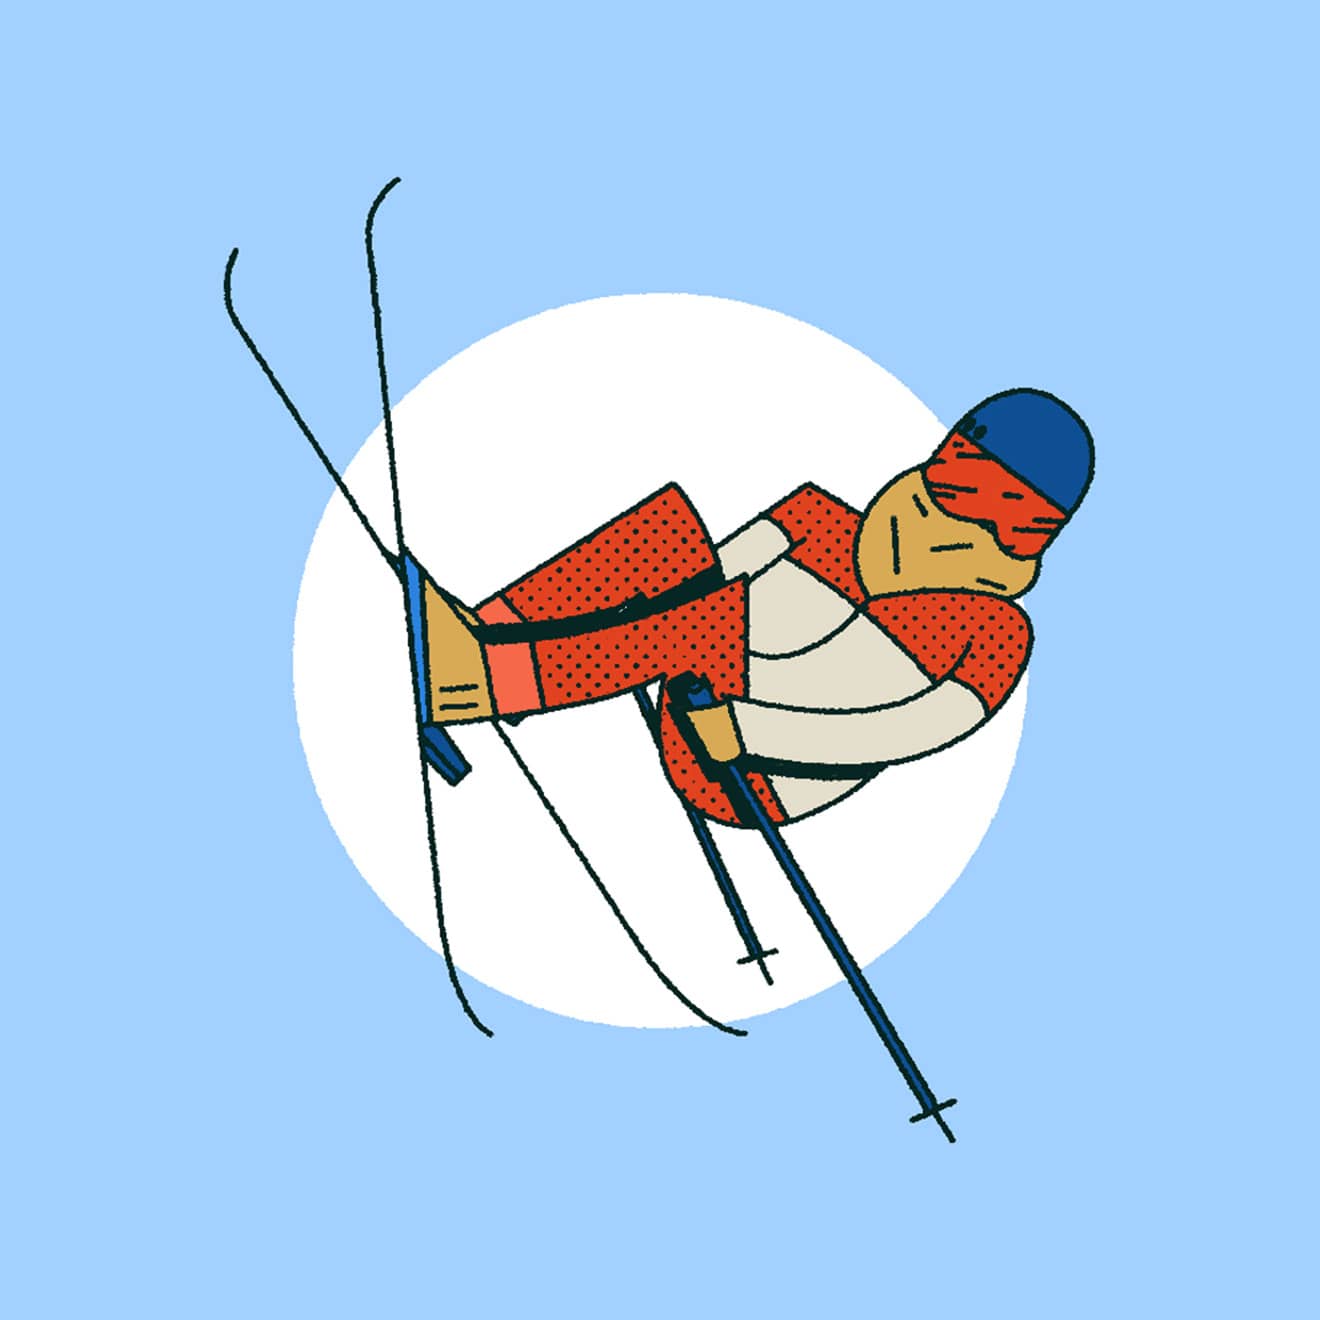 Blue, Red, White & Beige illustration of a person freestyle ski jumping